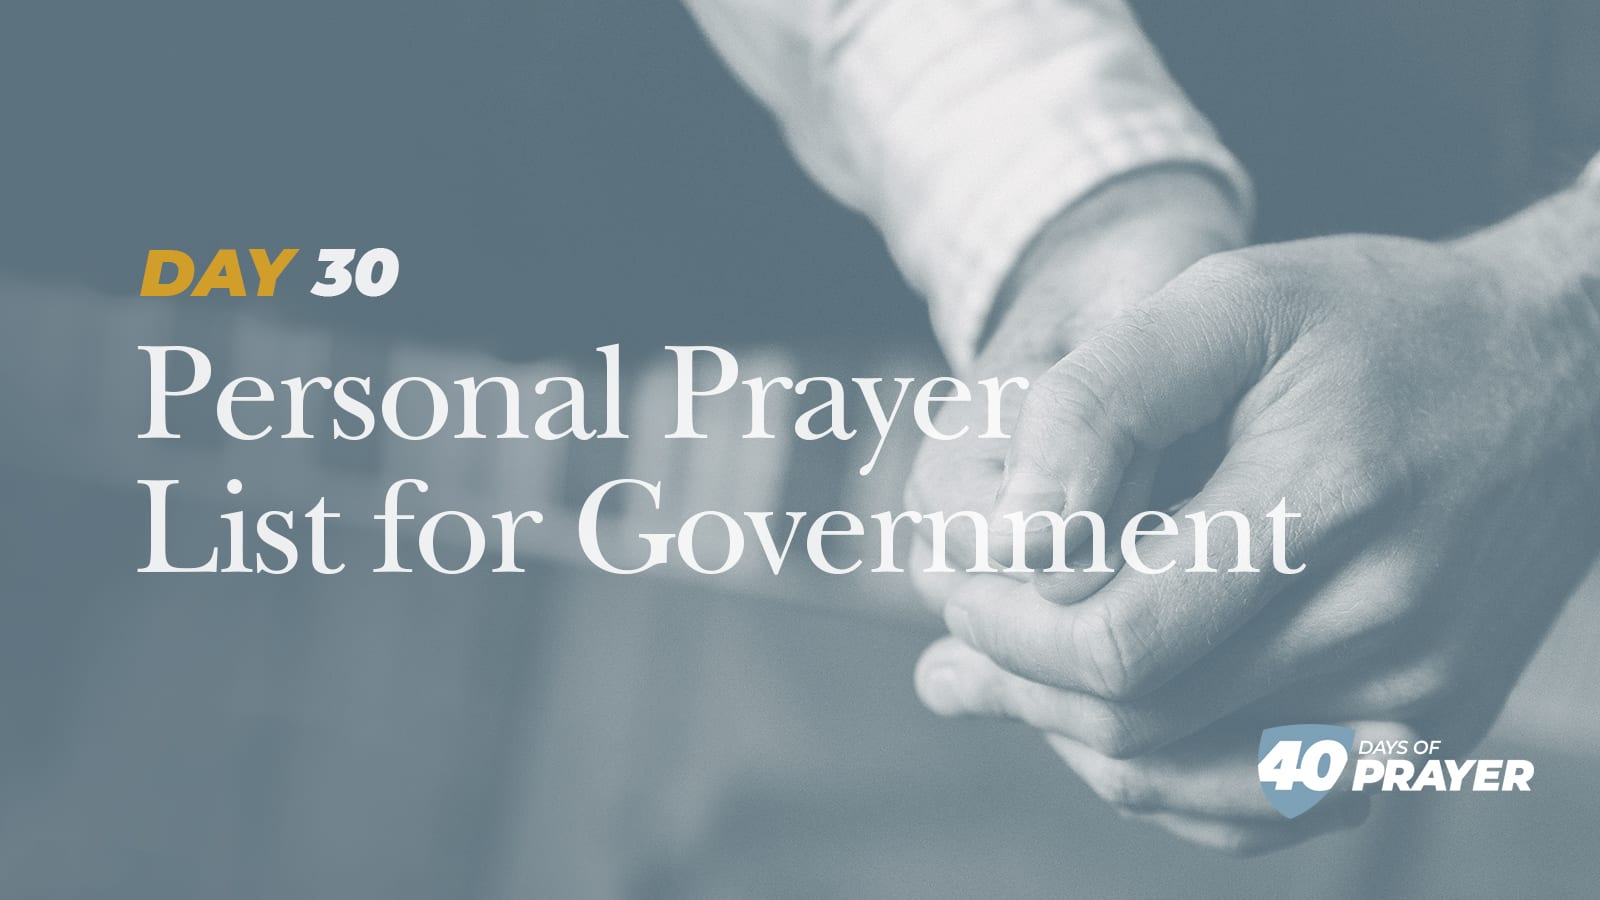 40 days of Prayer Day 30: Personal Prayer for Government